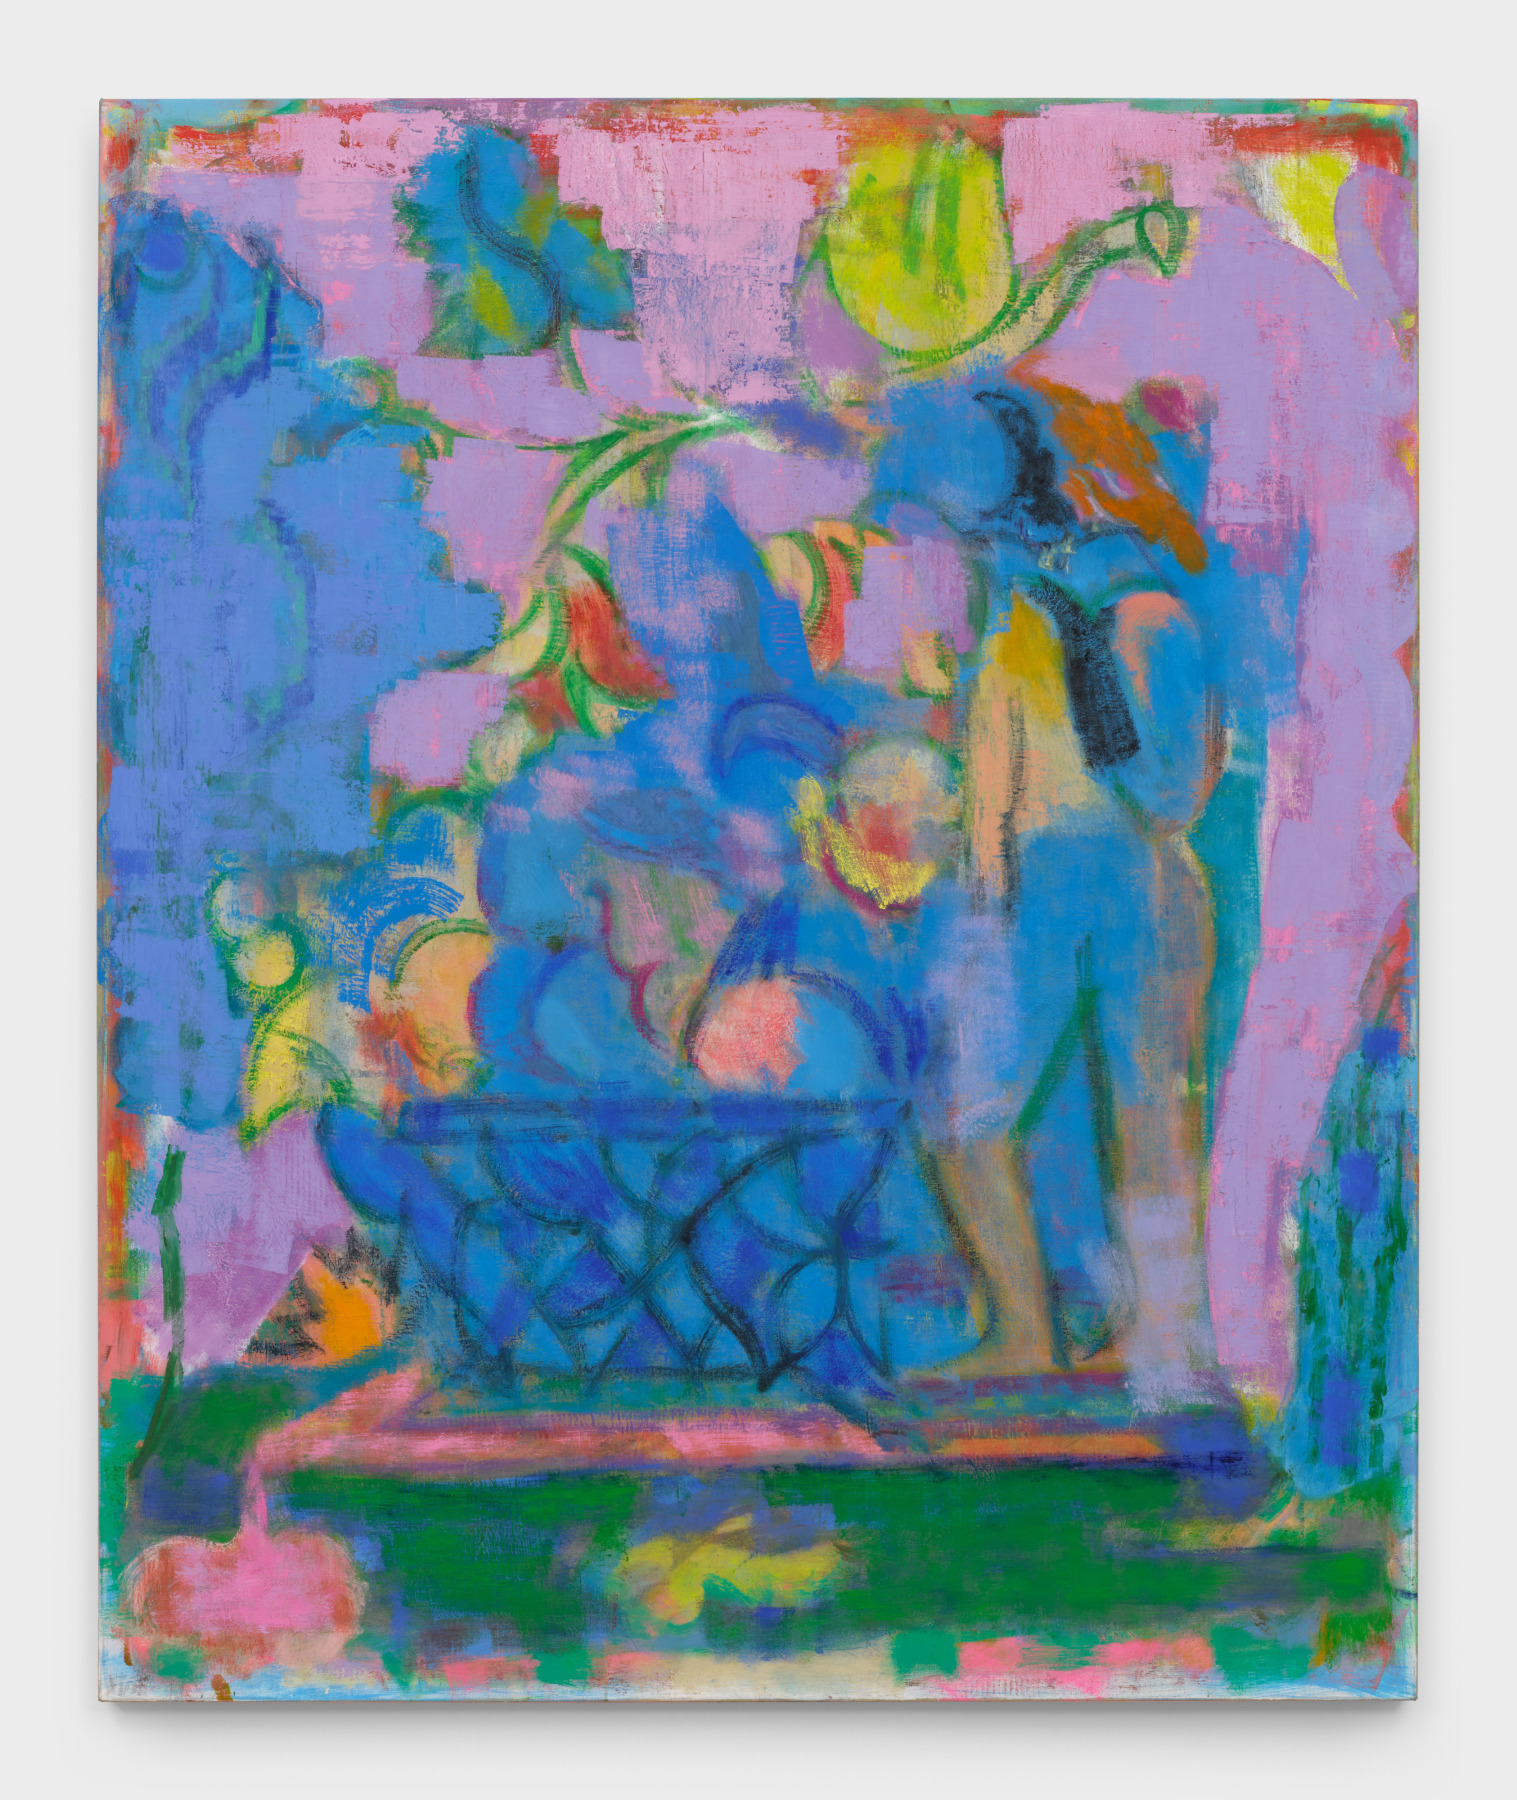 A painting by Michael Berryhill titled "Unbound," which shows a vague, faceless figure stepping toward an oversized fruit basket